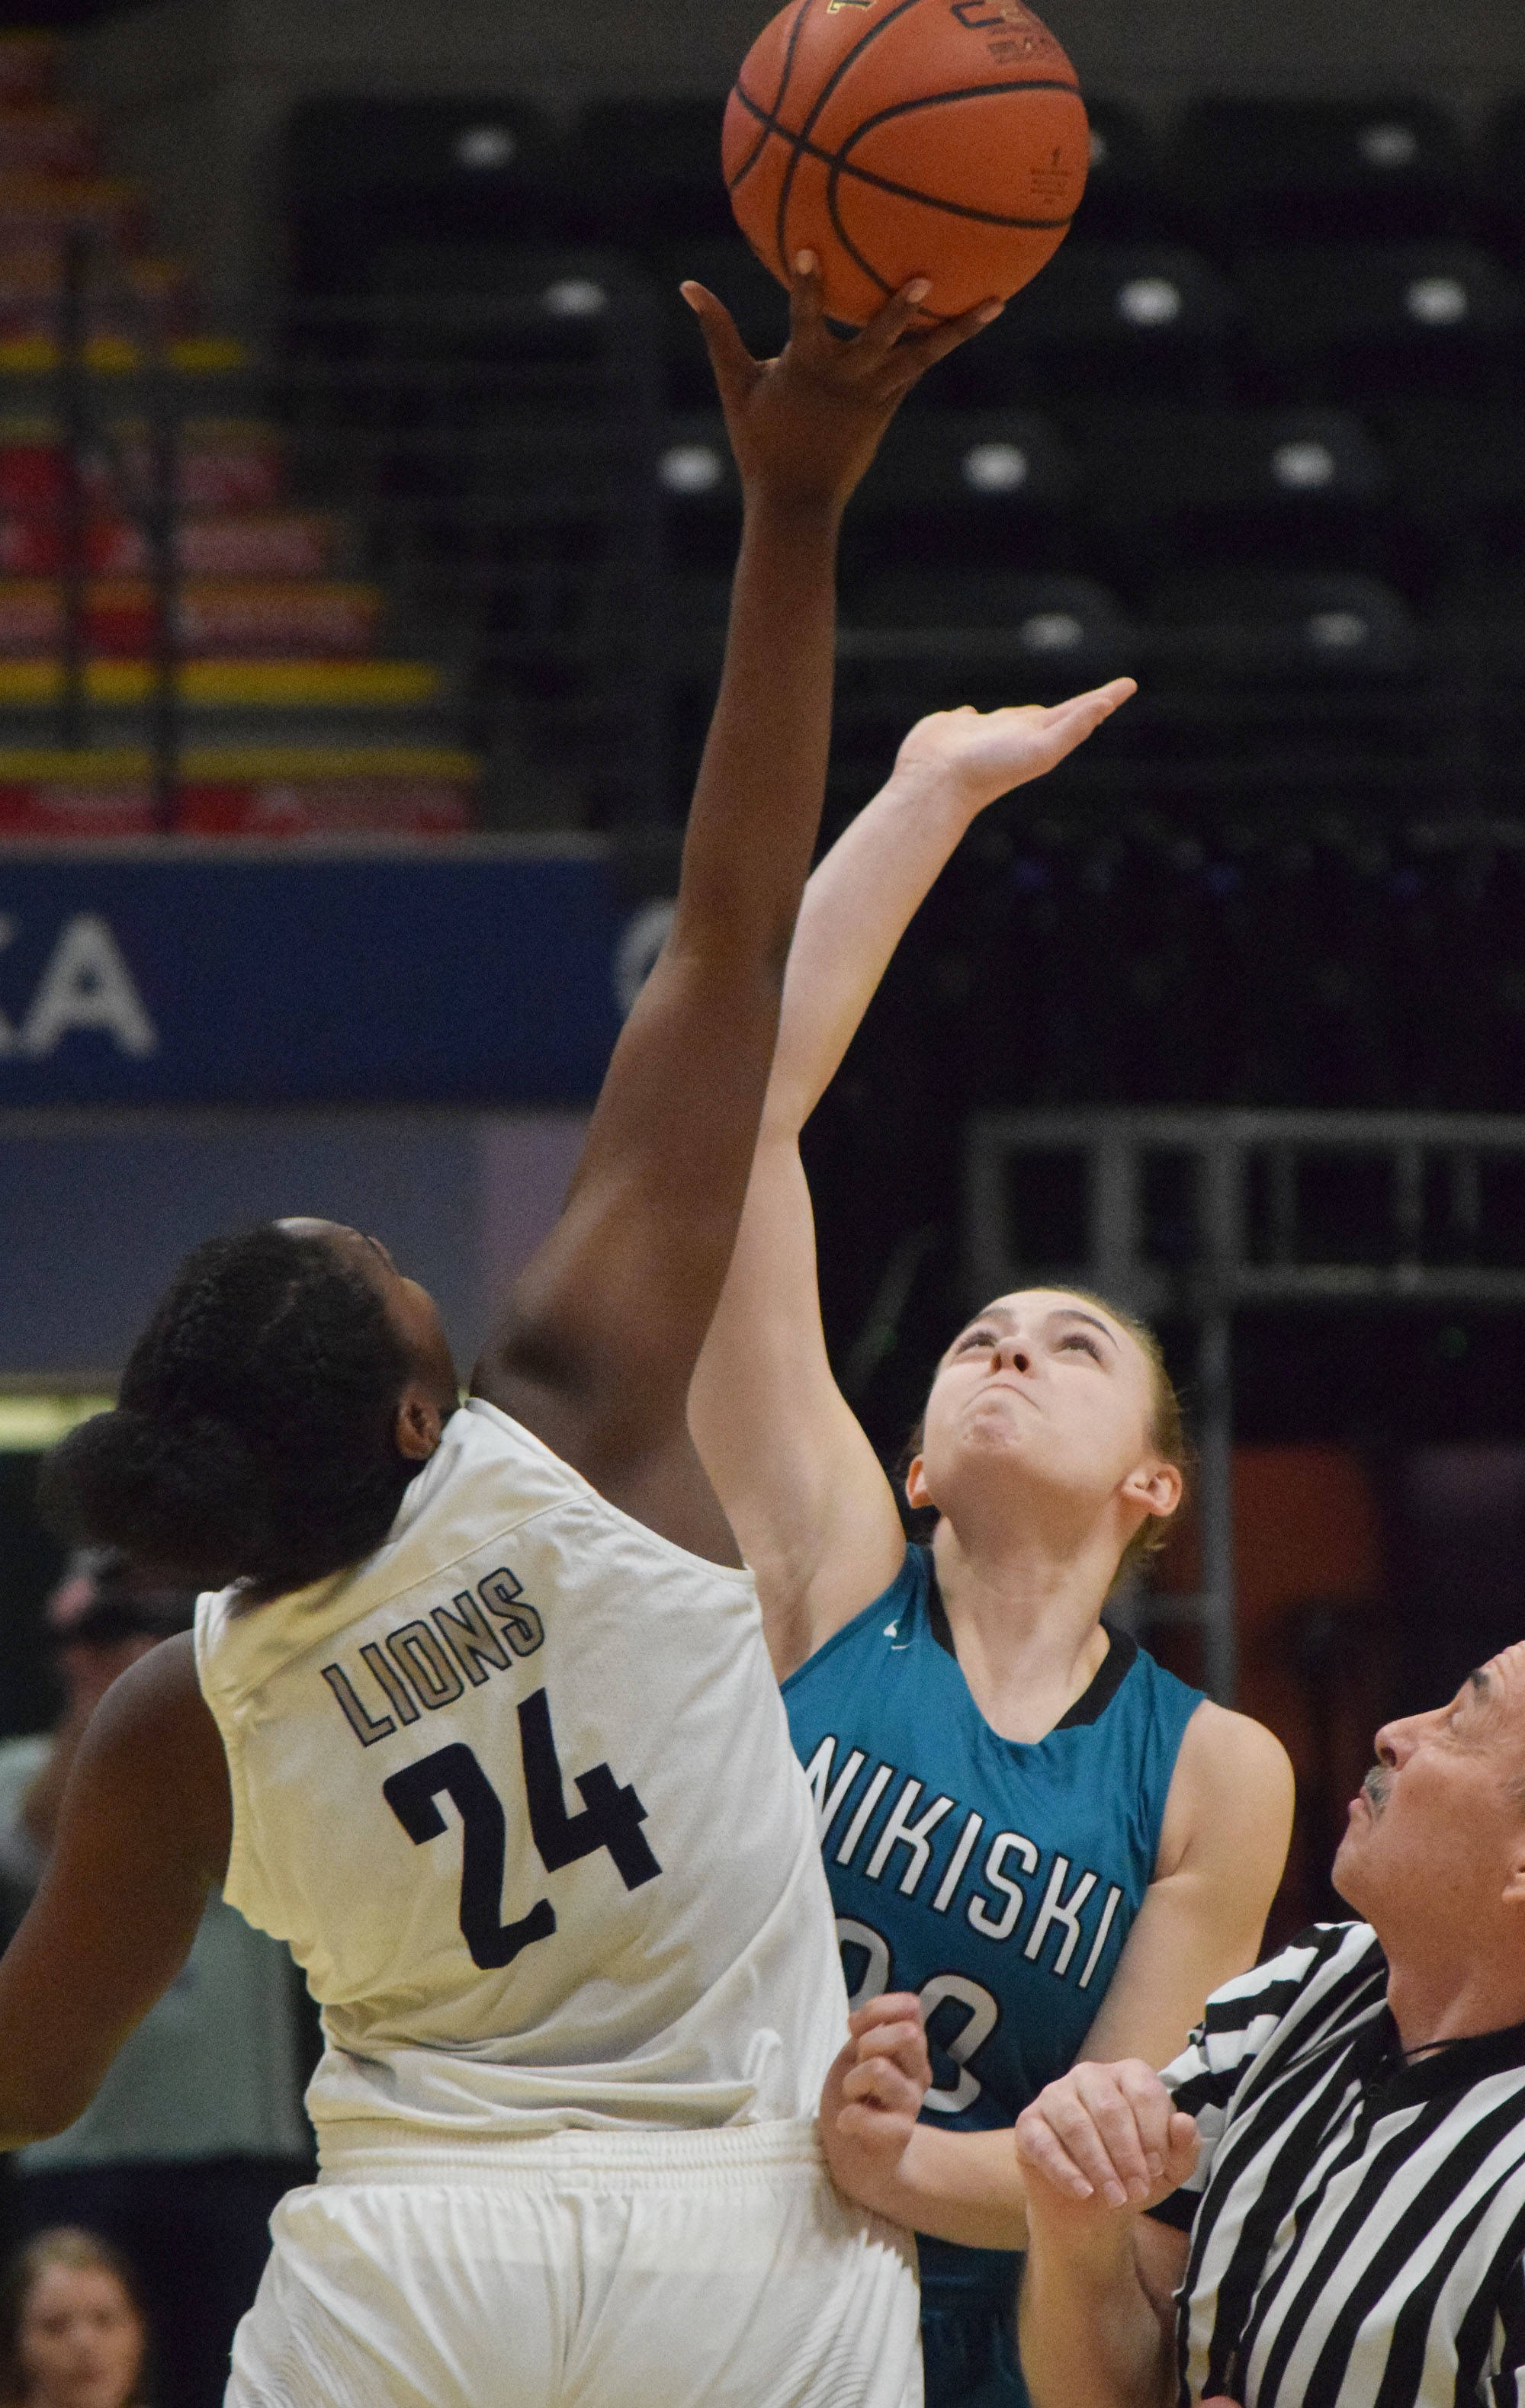 Nikiski’s Bethany Carstens (right) and ACS’s Jordan Todd tip off to begin Saturday’s Class 3A girls state basketball championship at the Alaska Airlines Center in Anchorage. (Photo by Joey Klecka/Peninsula Clarion)